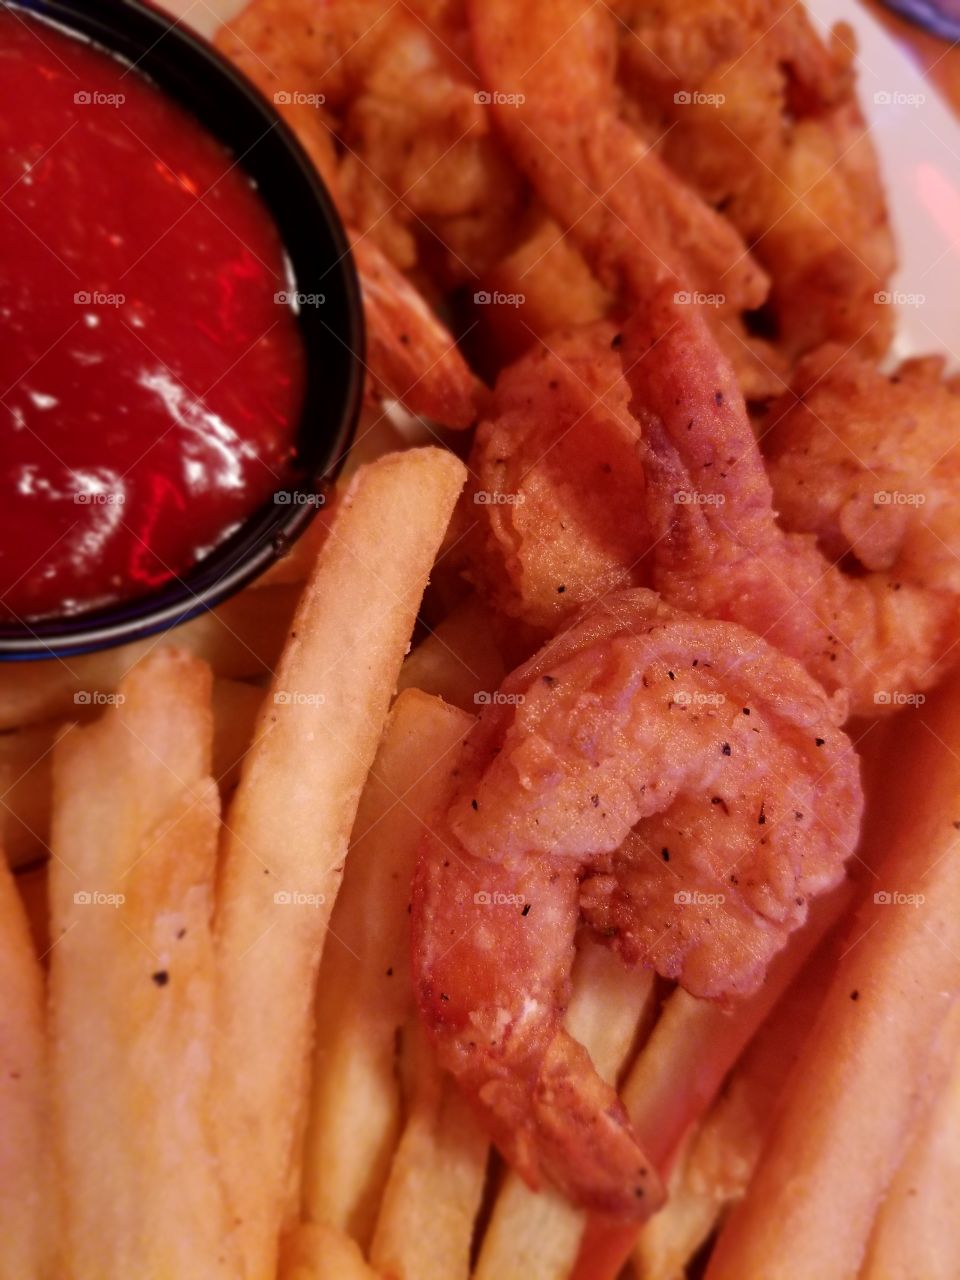 Shrimp and Fries